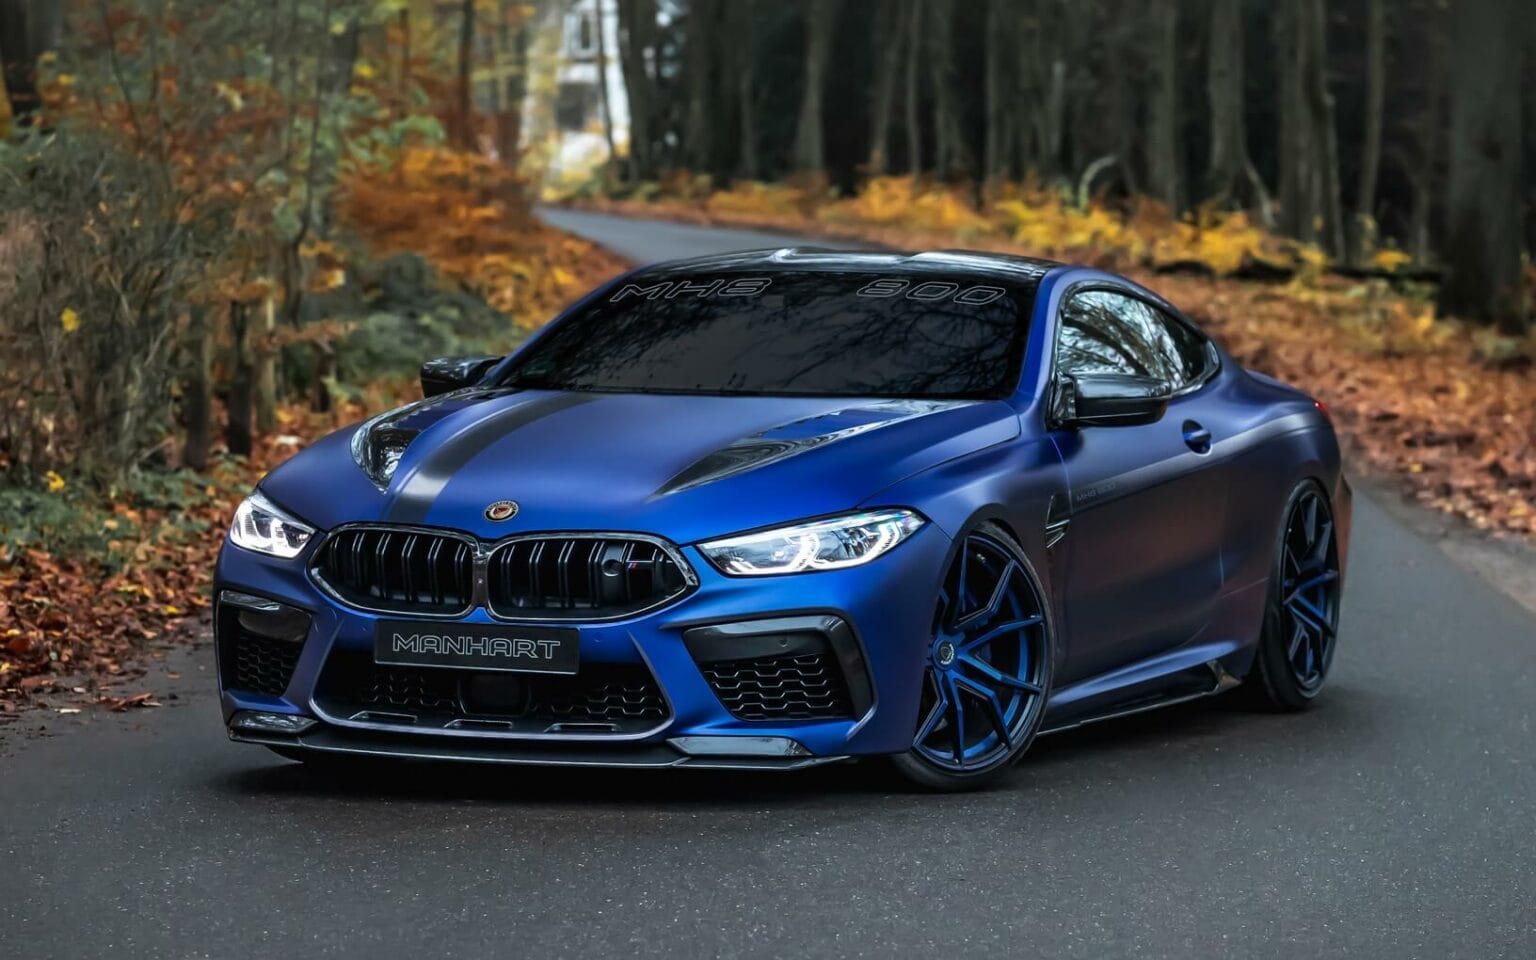 BMW M8 Competition by Manhart gets Painted In Matte Blue BMW.SG